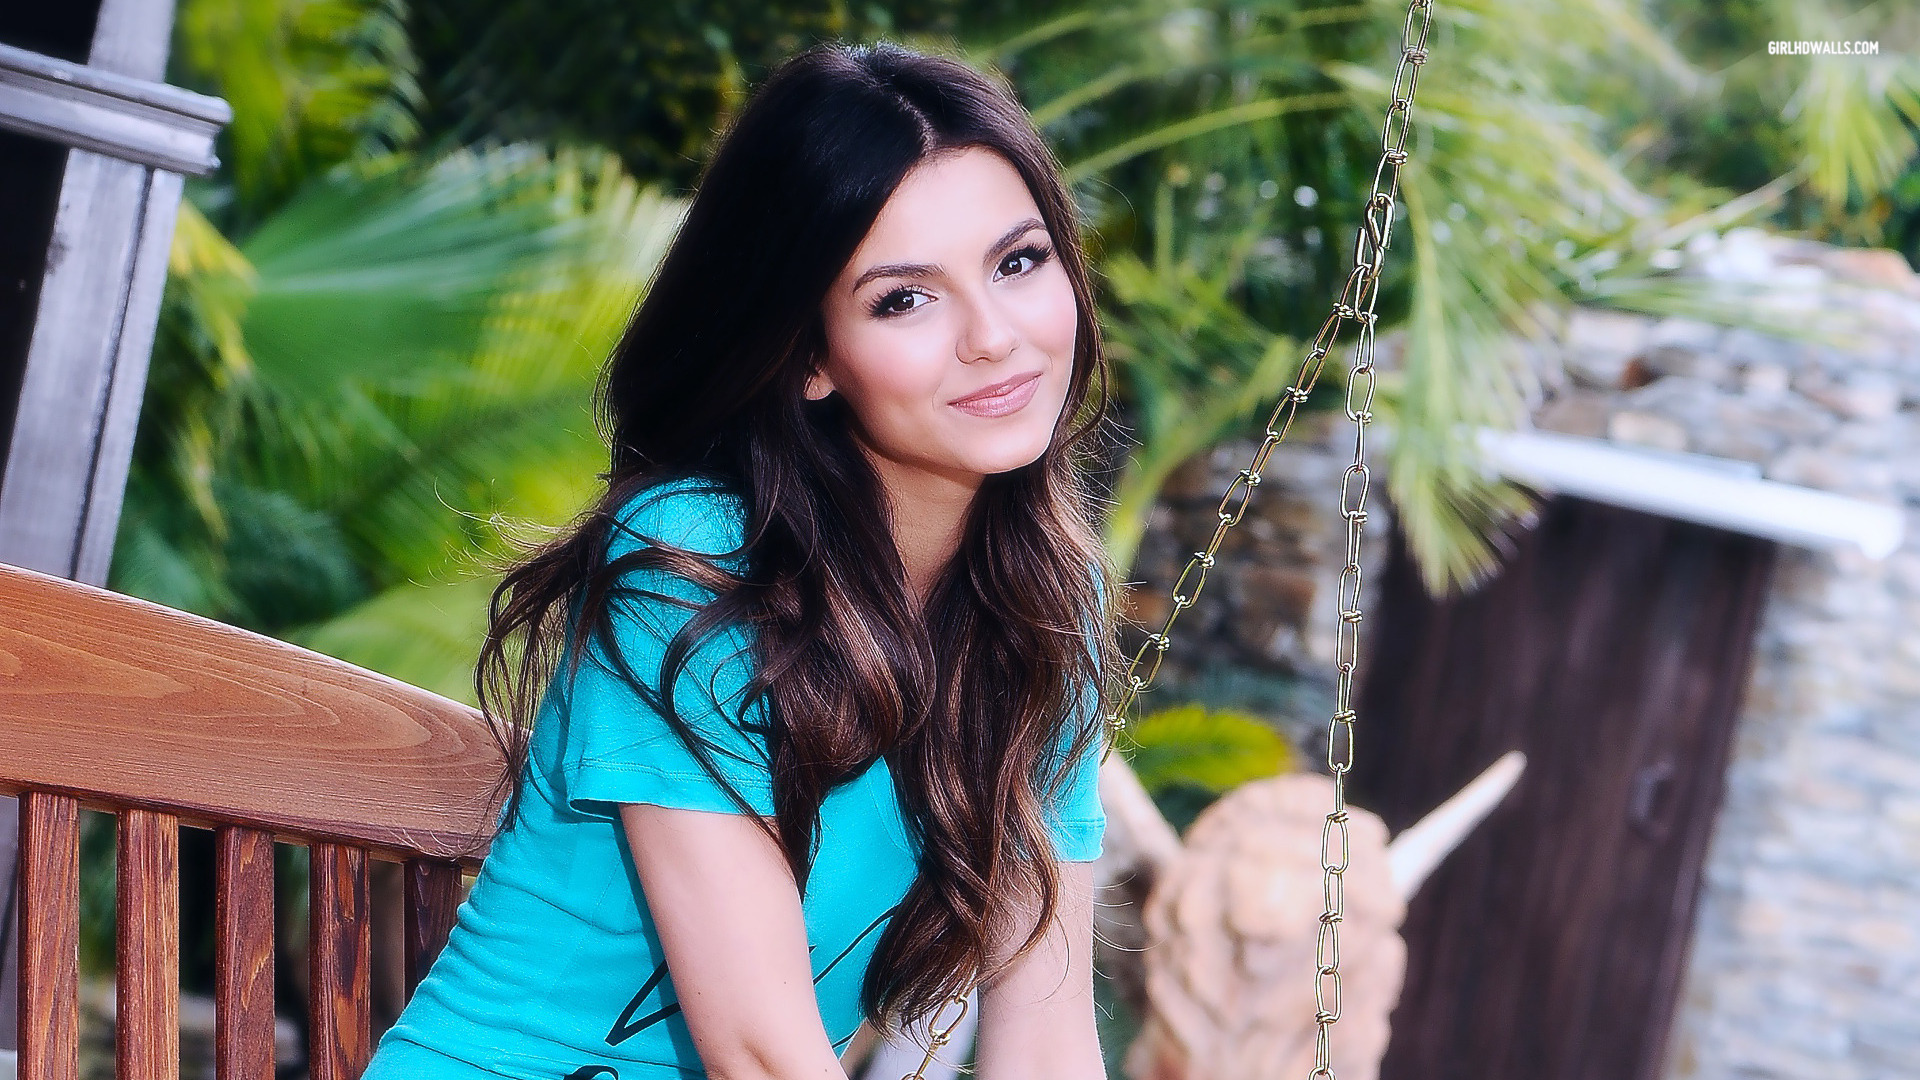 Victoria Justice Wallpapers High Quality | Download Free